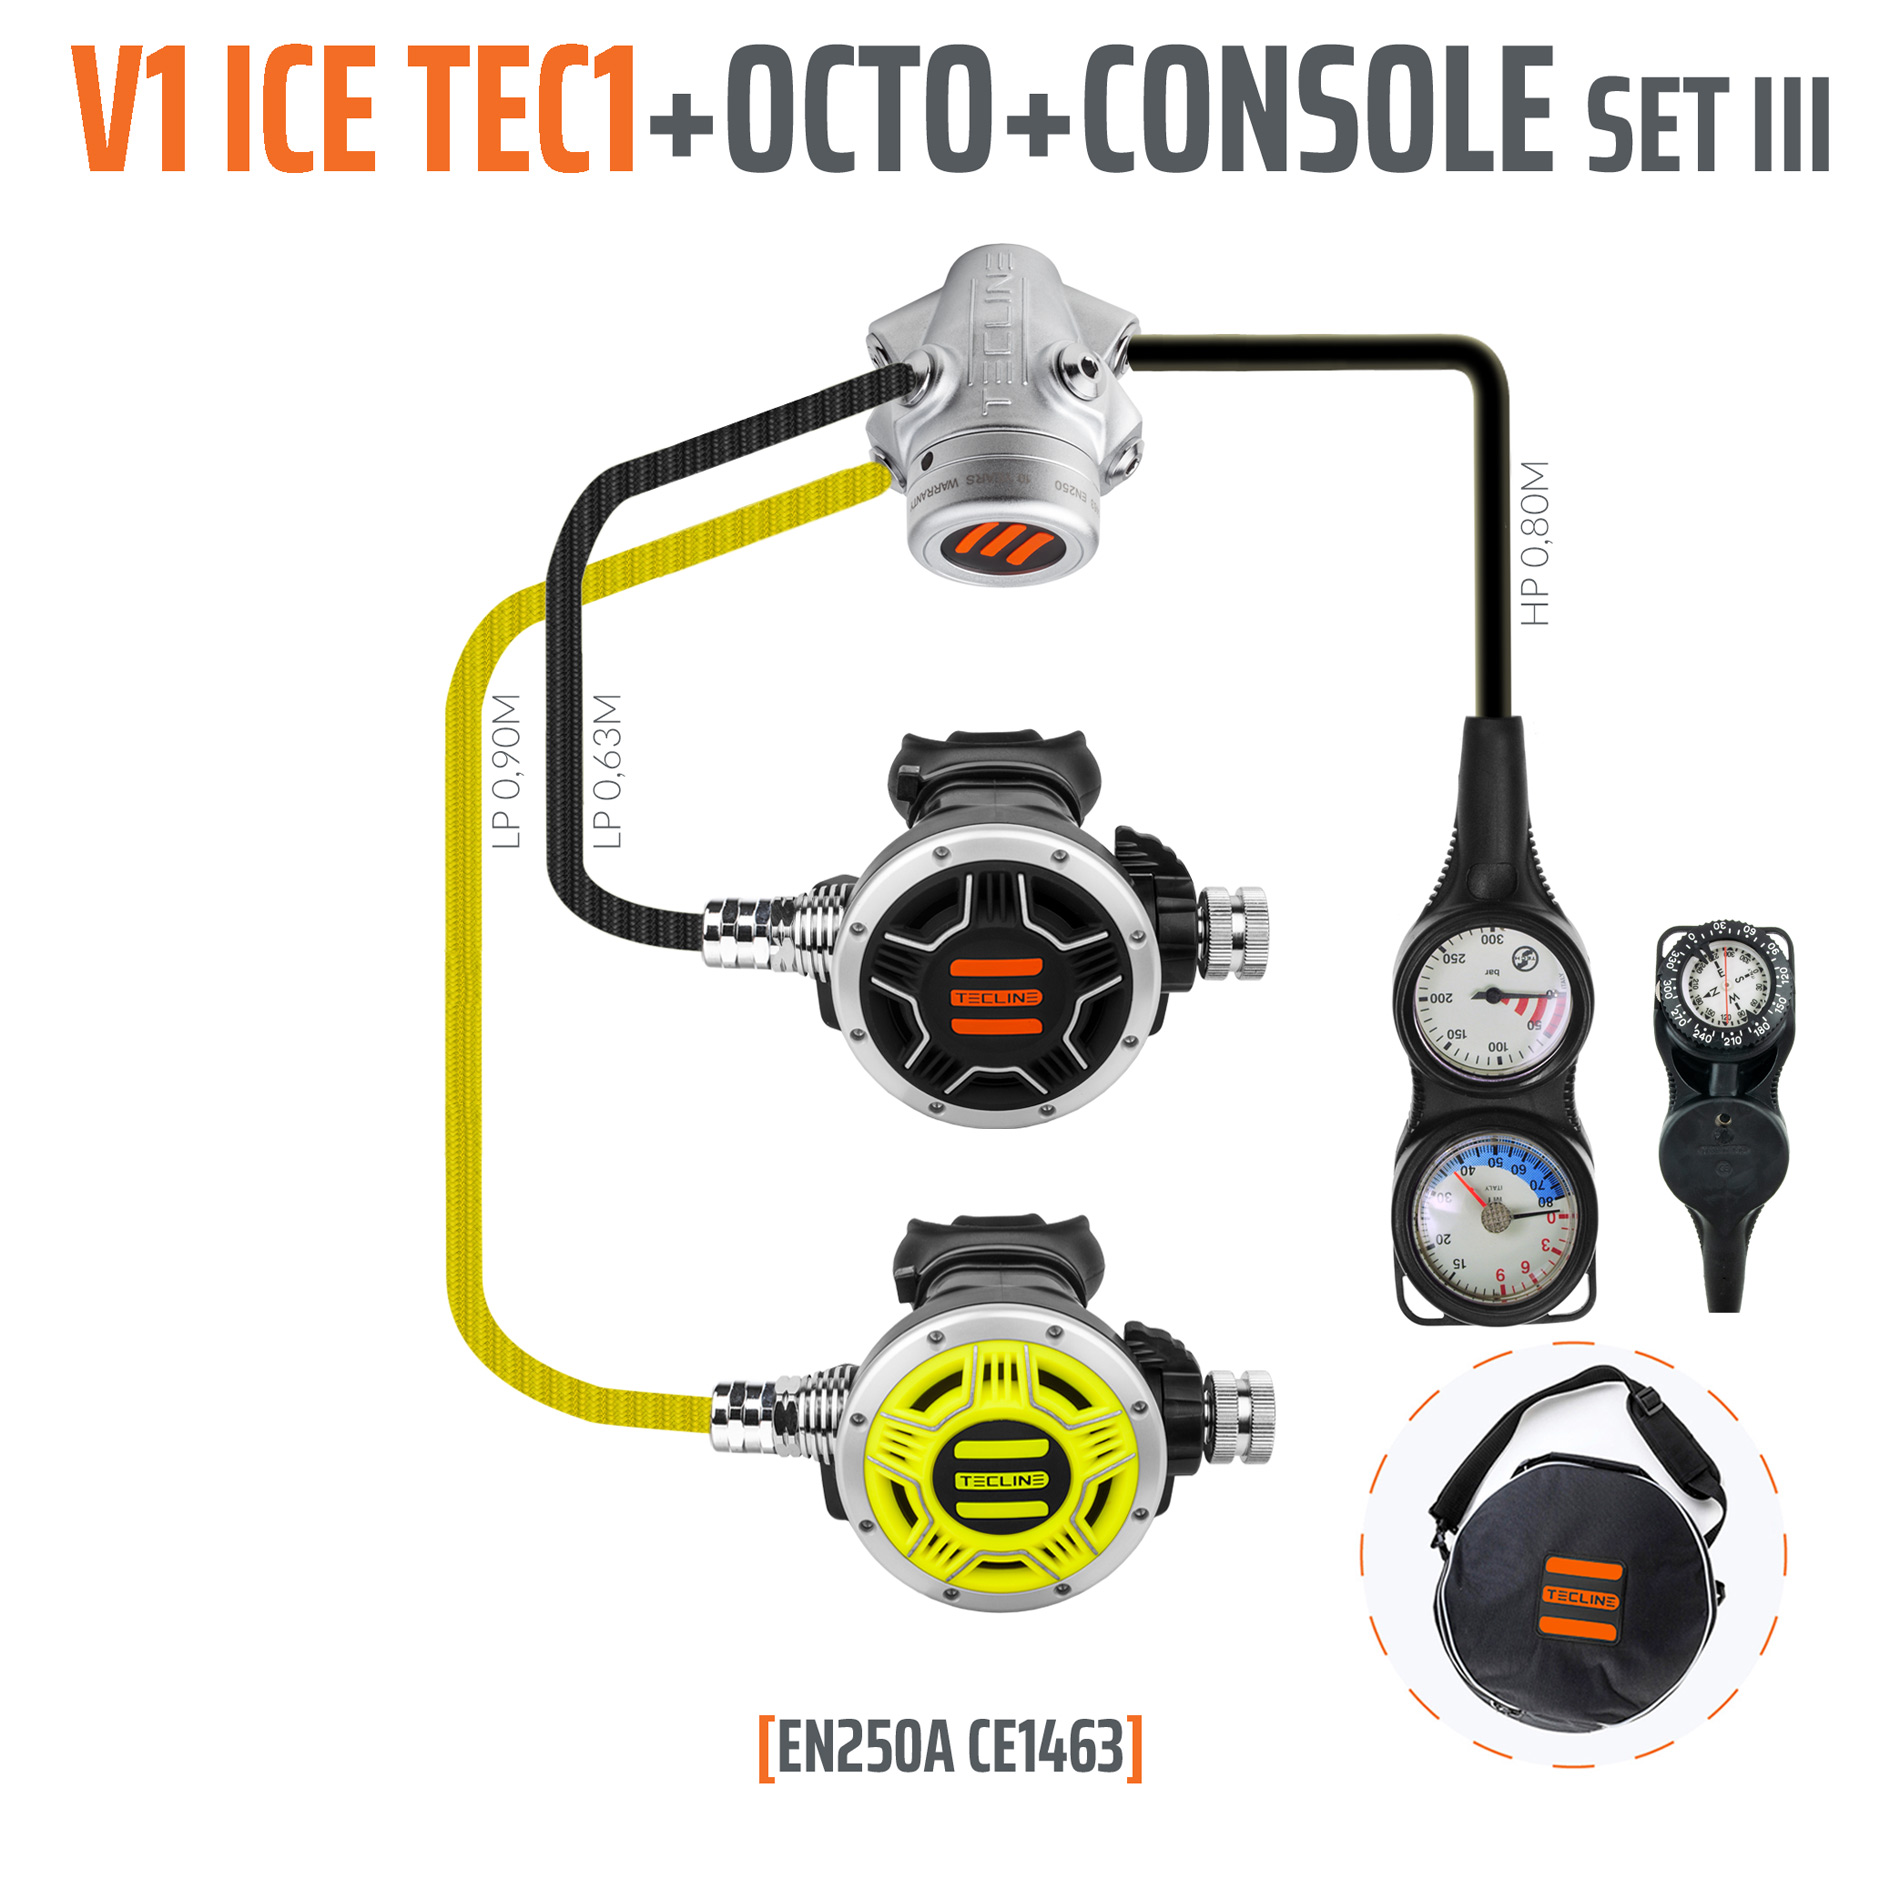 Tecline Regulator V1 ICE TEC1 set III with octo and 3 elements console – EN250A